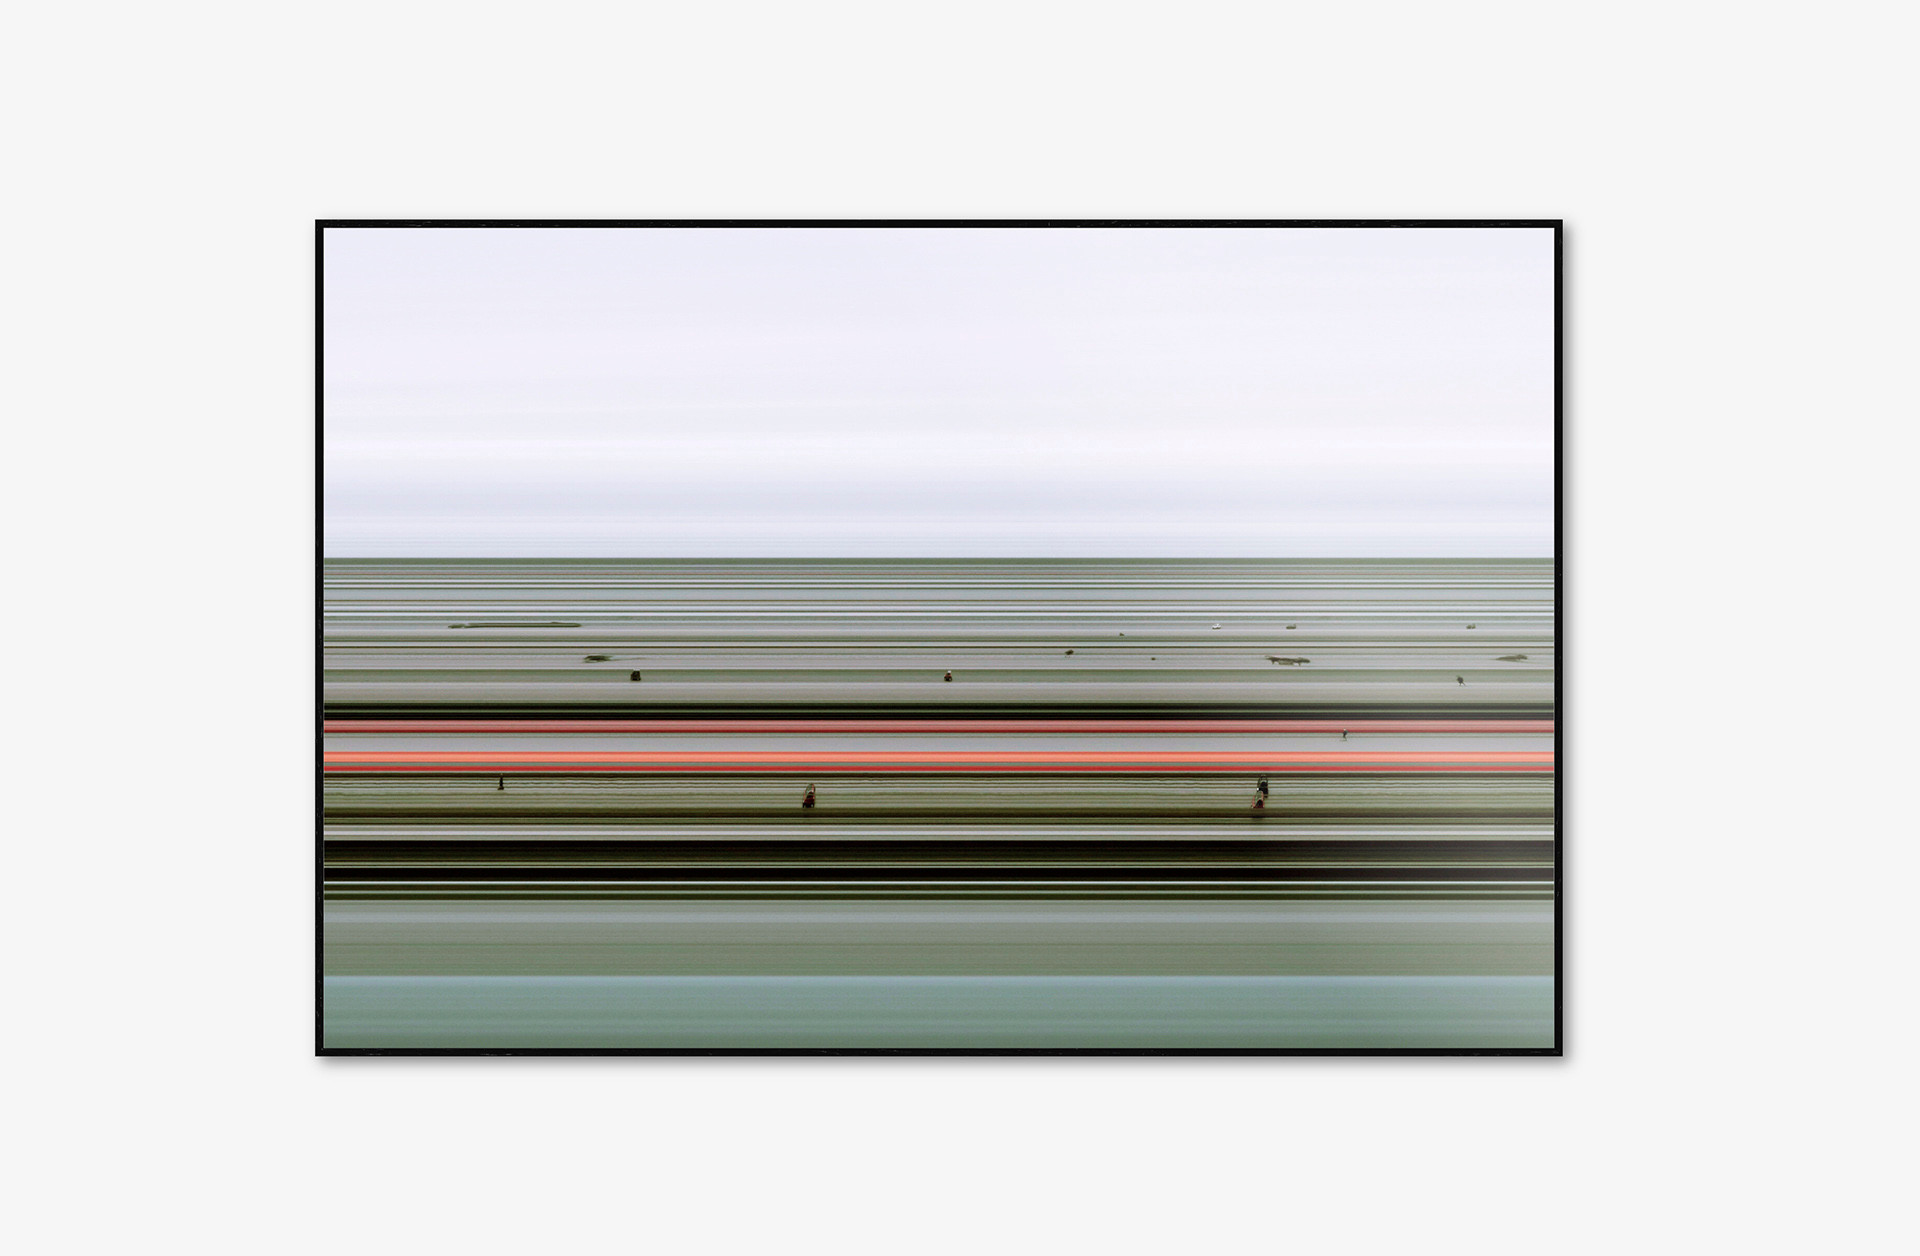 TimeScape No.1. Multimedia Installation:
Two-channel HD Video (from 4k DCI master), silent, Loop, Dimensions variable.